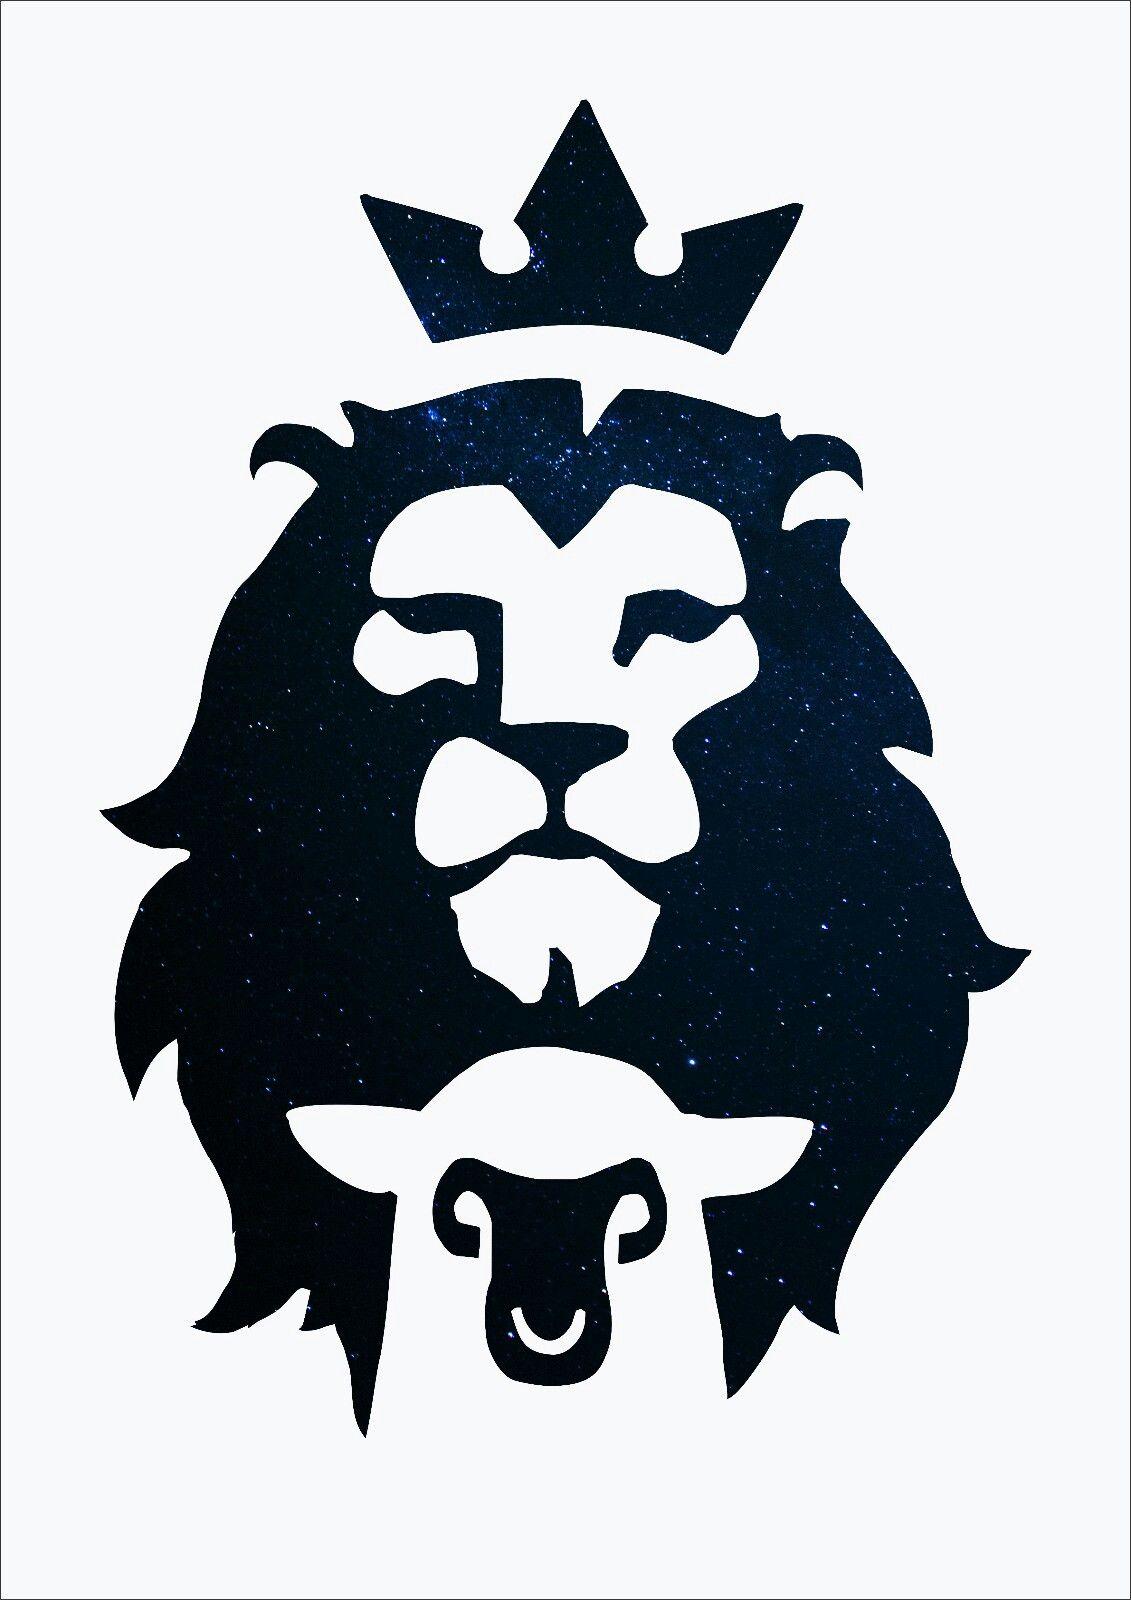 Christian Lion Logo - Pin by Deliel Rodrigues on Christ | Pinterest | Lambs, Lions and Tattoo